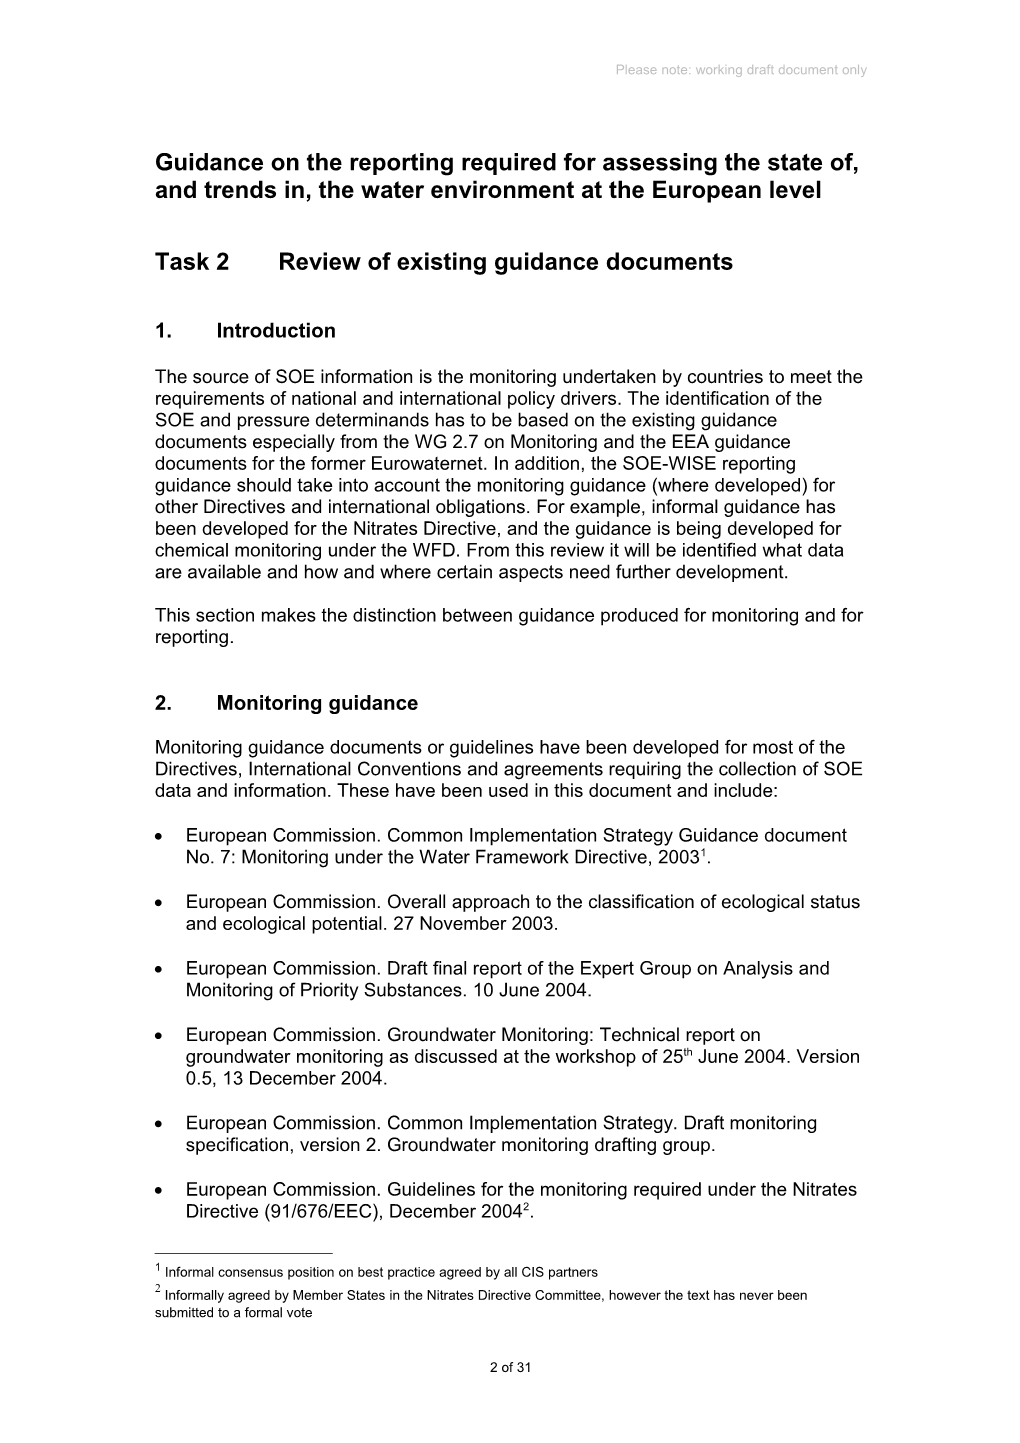 Task 2Review of Existing Guidance Documents